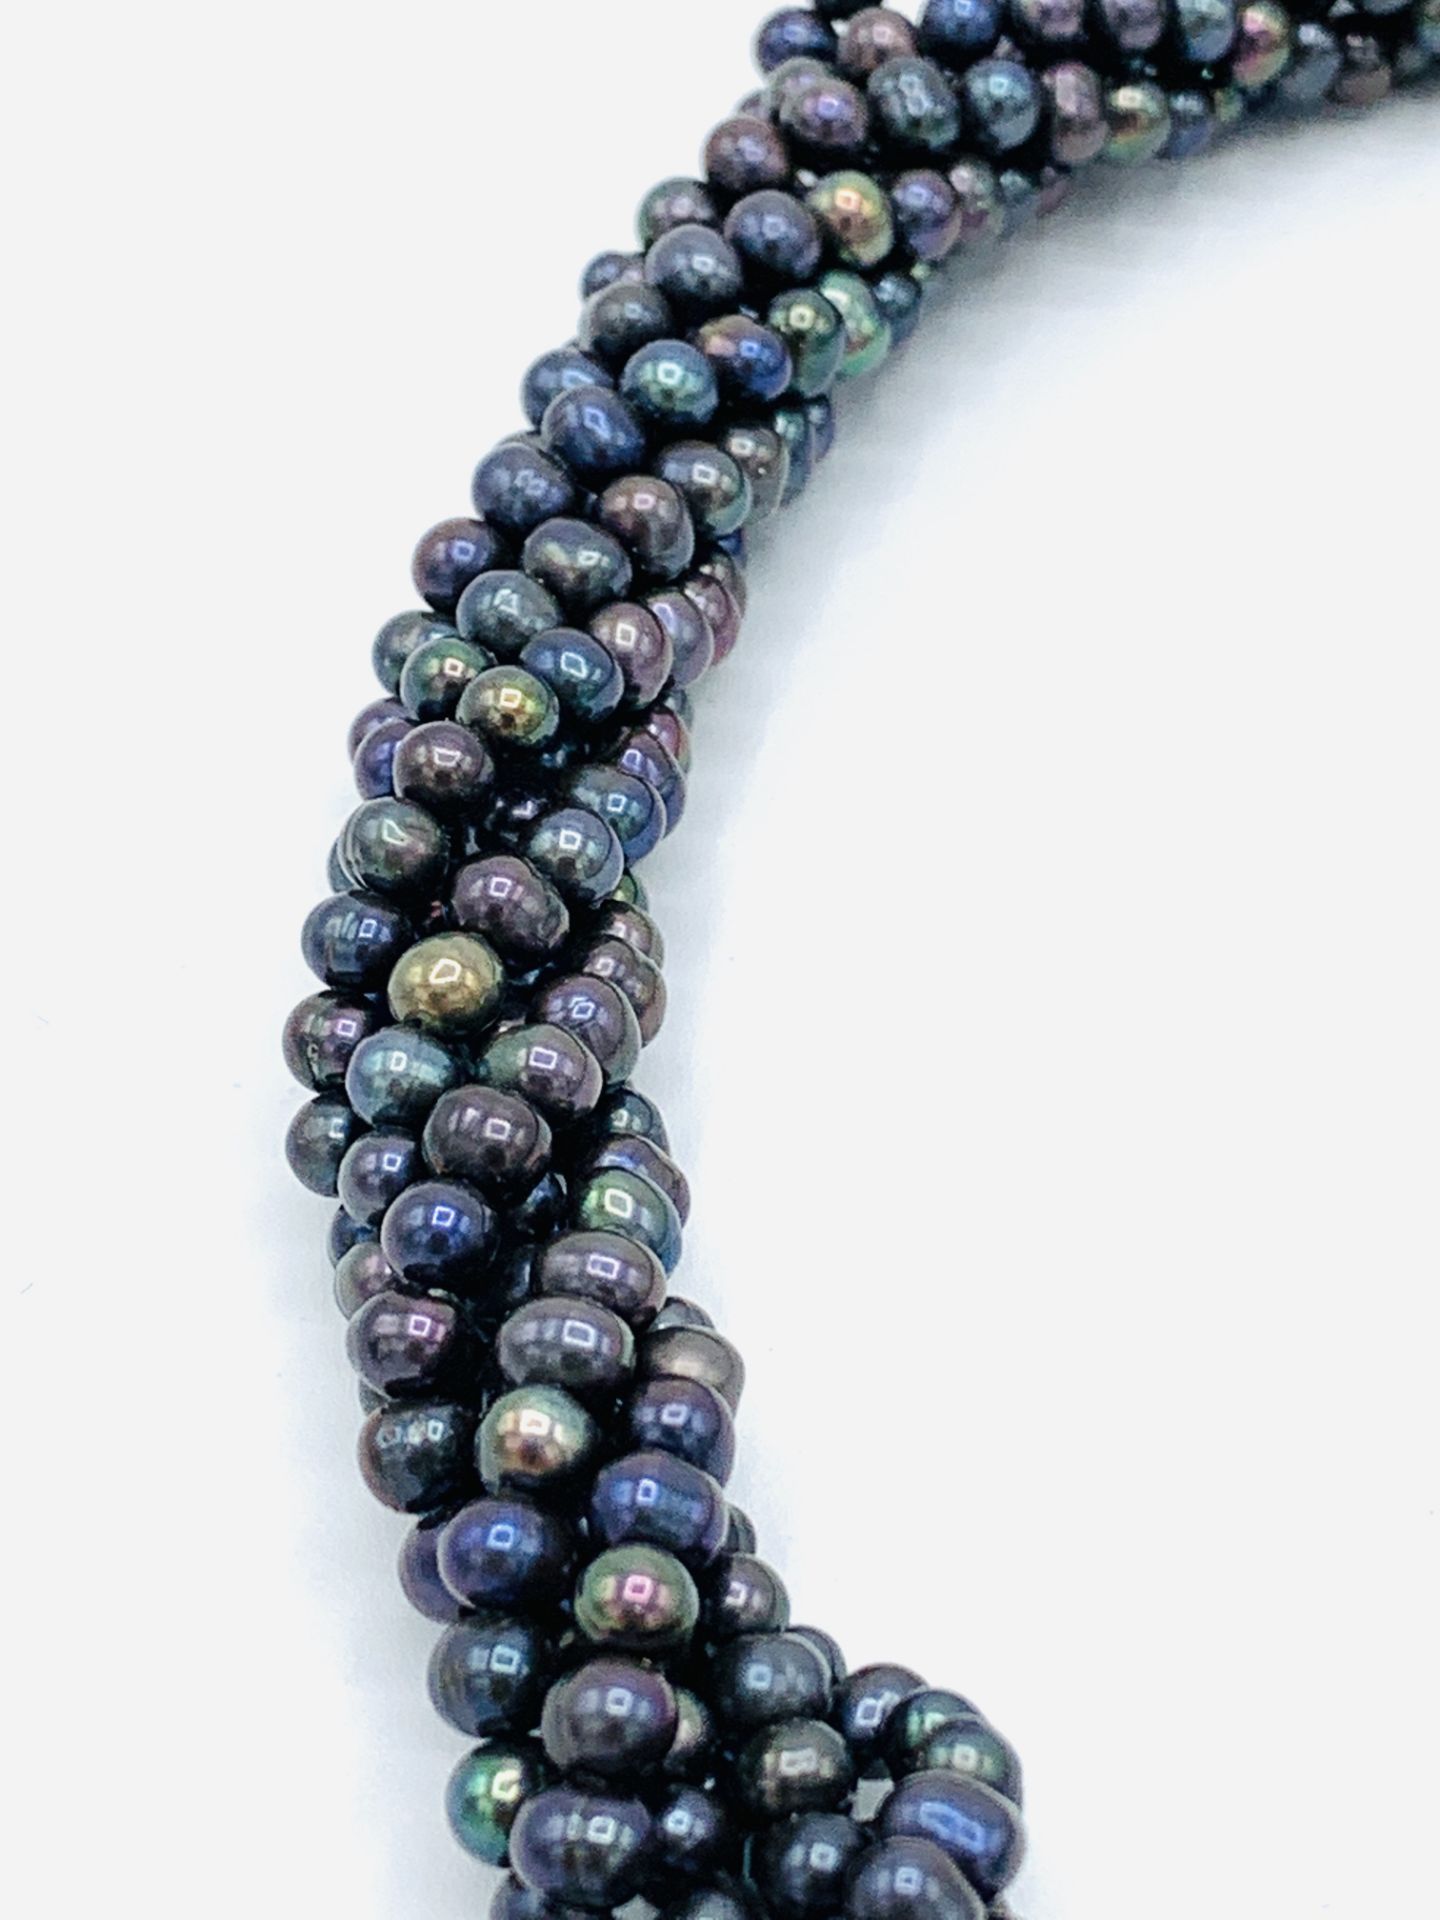 Six strand black Tahitian pearl necklace - Image 3 of 4